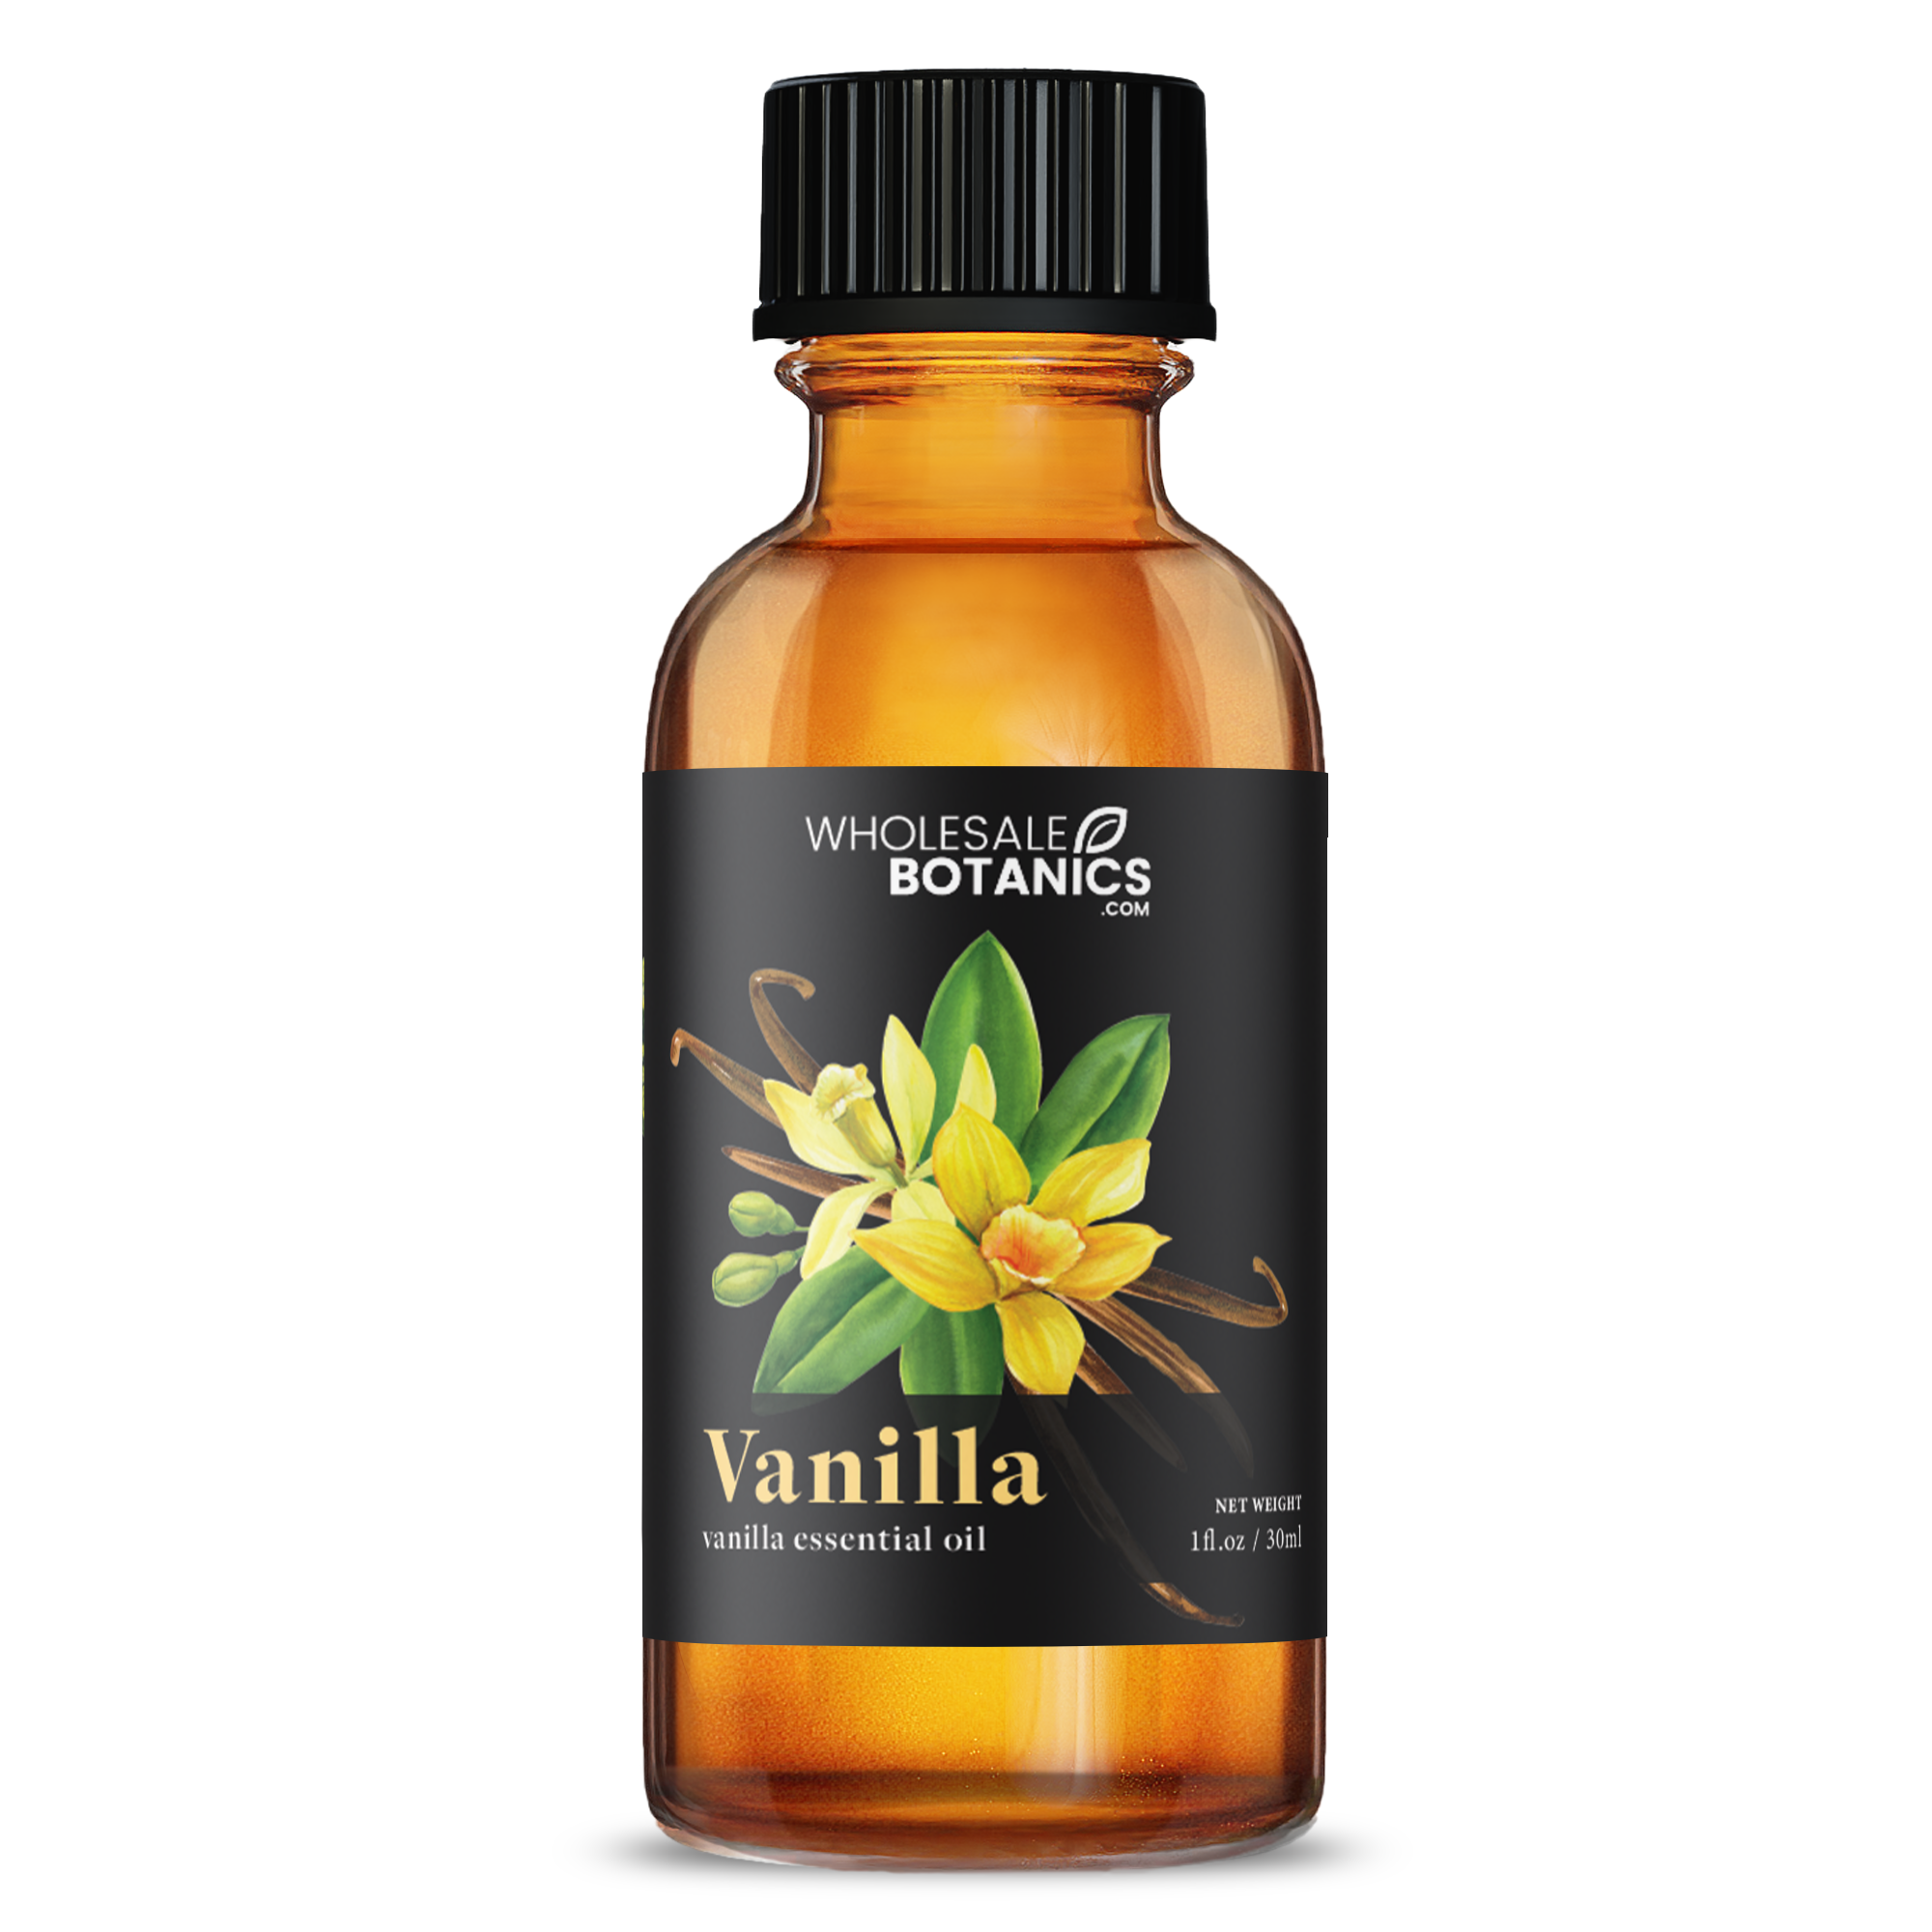 Get Wholesale Vanilla Fragrance Oil For Your Business 